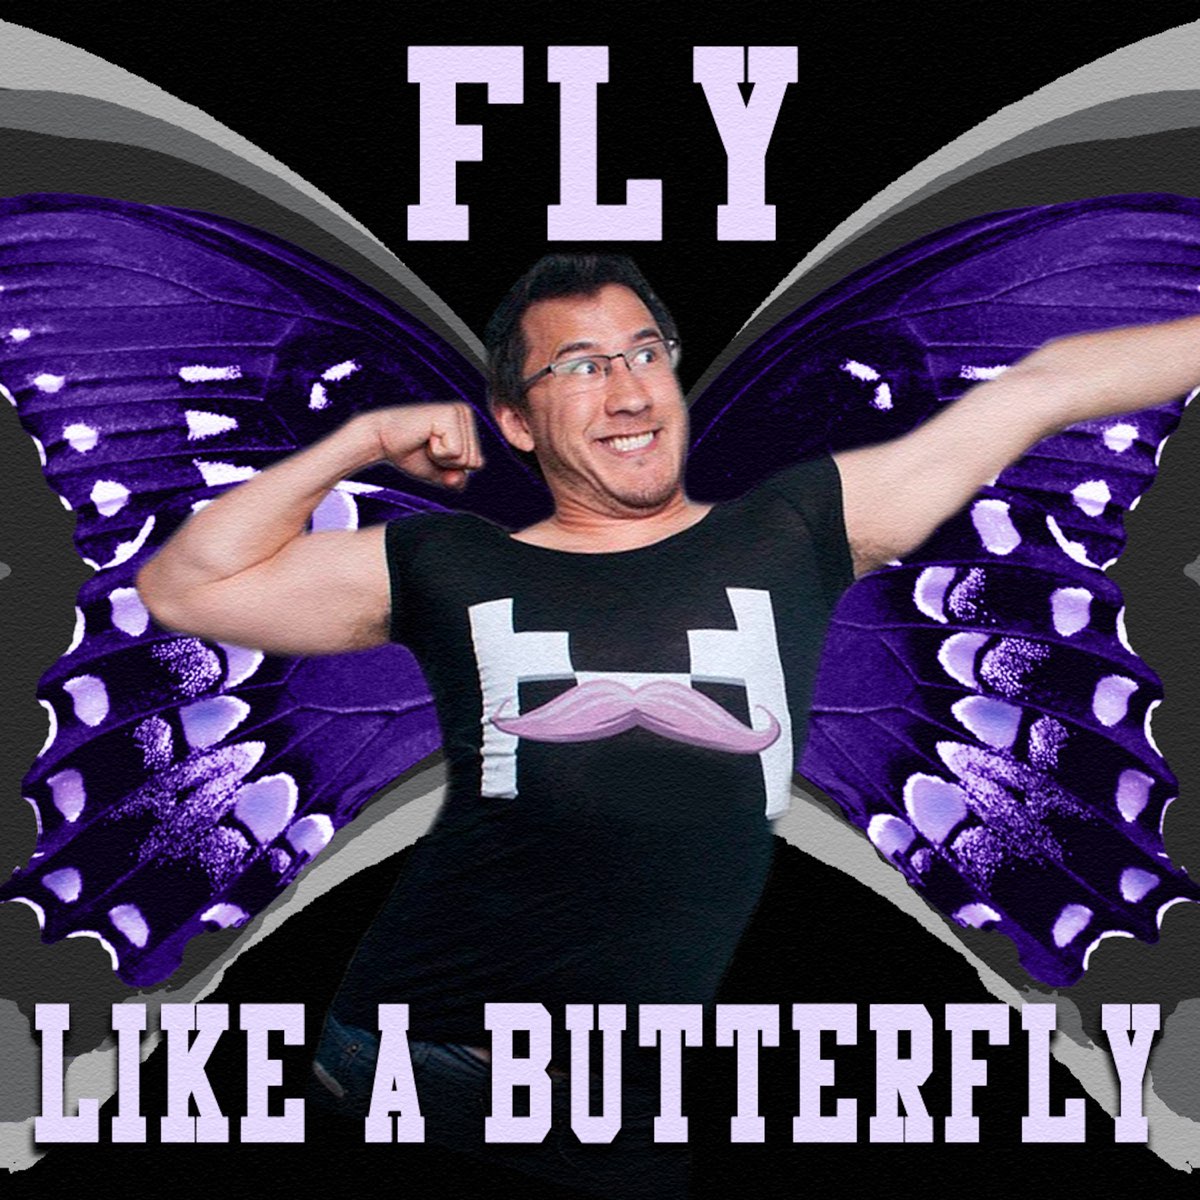 Like flying песня. Fly like a Butterfly песня. Fly like a Butterfly картинки. Gonzo Fly brothers. Album Covers Butterfly.